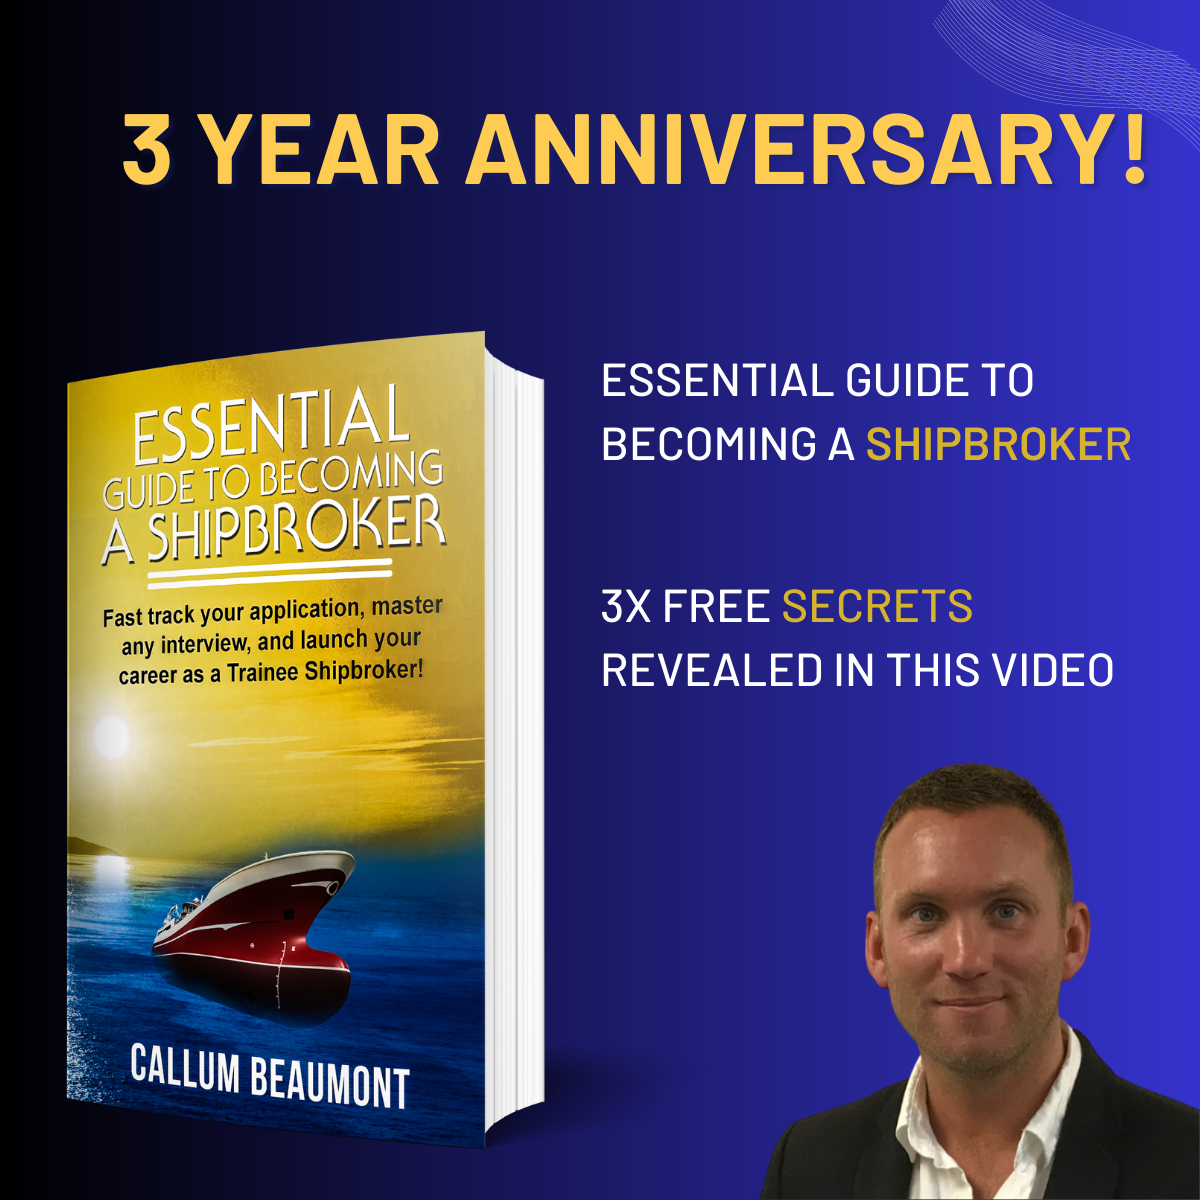 Essenital Guide To Becoming a Shipbroker – 3 Year Anniversary